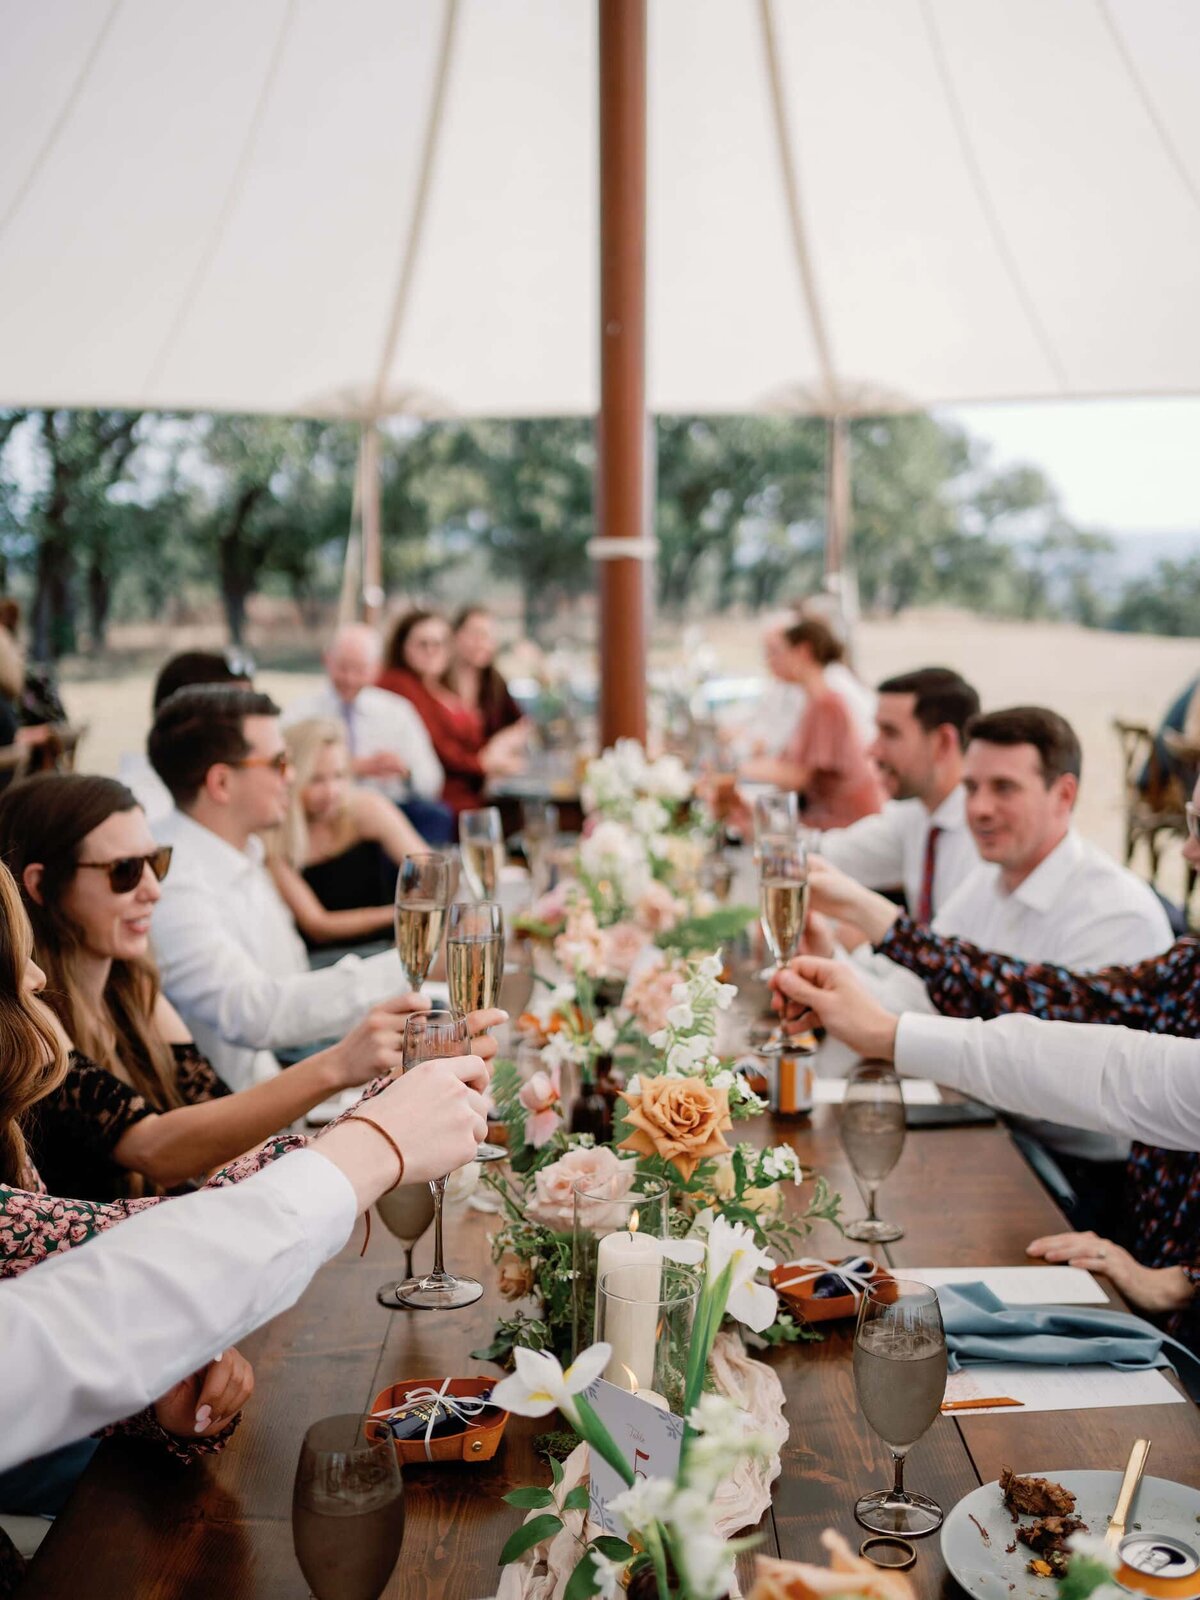 Group of guests toast at an elegant event